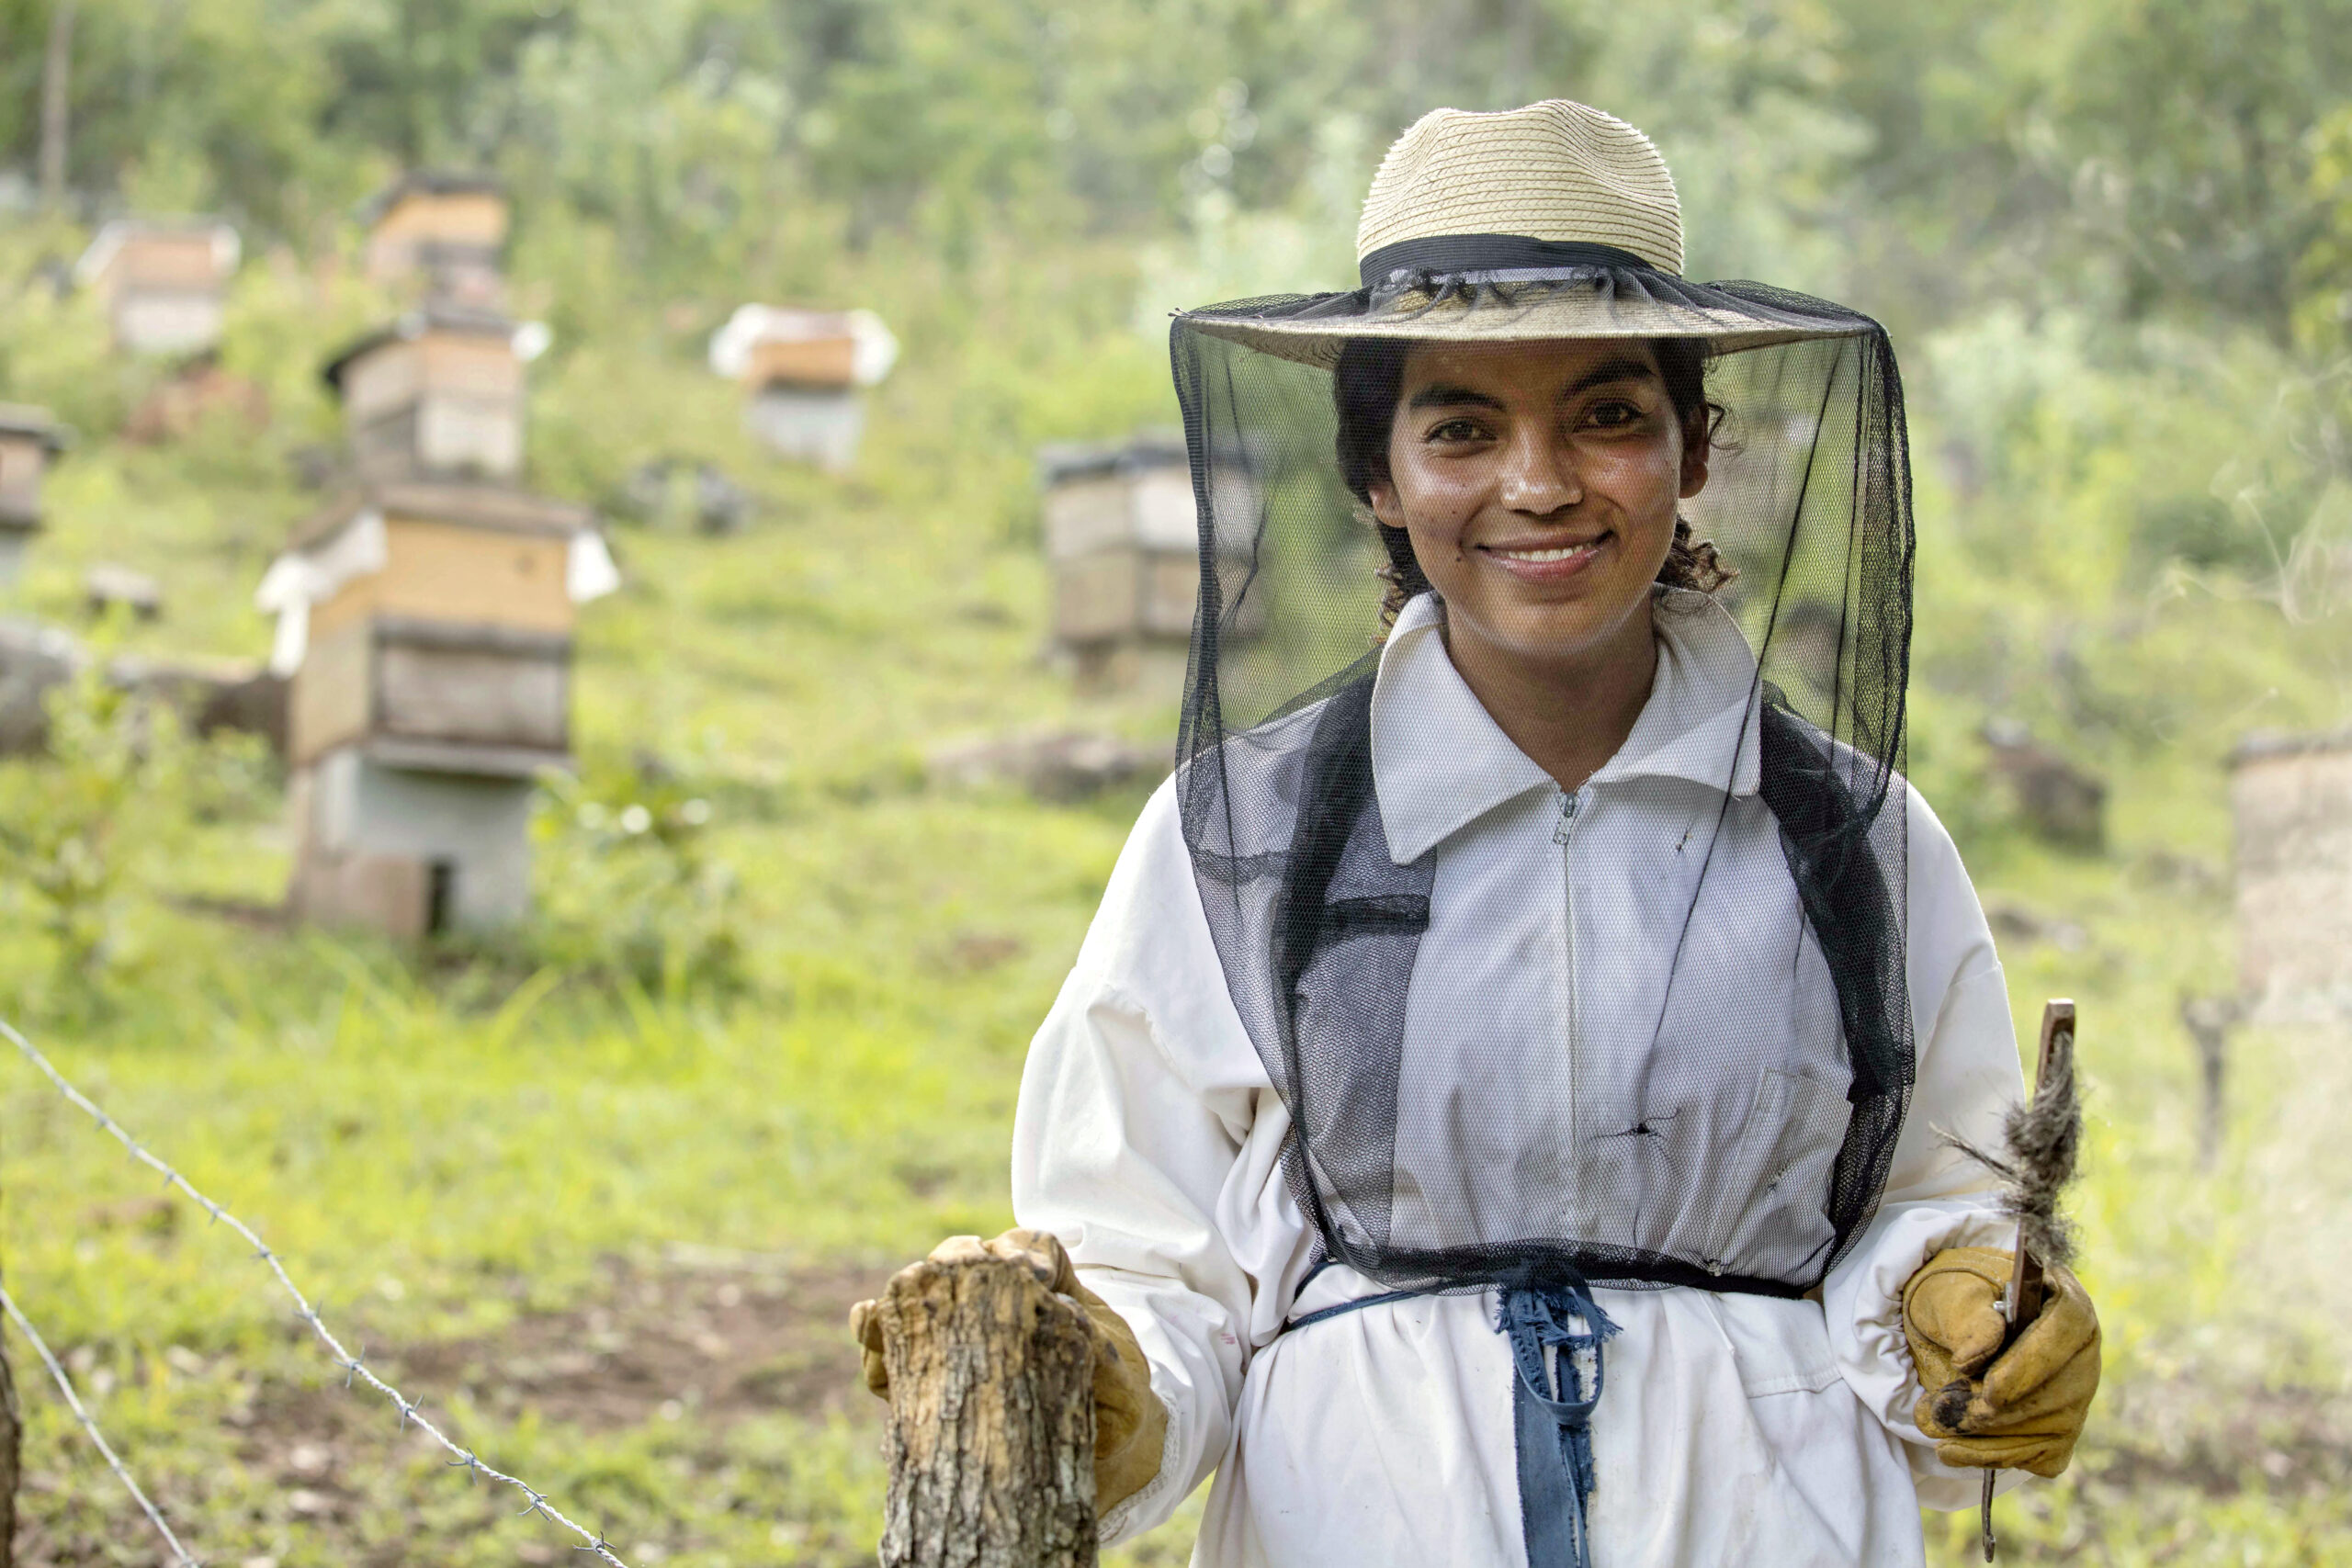 Oralia Ruano Lima was among the first women in her indigenous community to join an all-female entrepreneurship project as a beekeeper. Today the women beekeepers of Urlanta, a village in the south-eastern region of Guatemala, are bringing in sustainable jobs and income to their rural communities, and changing mindsets and attitudes towards women. 

Photo: UN Women/Rosendo Quintos

Read More: http://www.unwomen.org/en/news/stories/2017/2/from-where-i-stand-oralia-ruano-lima